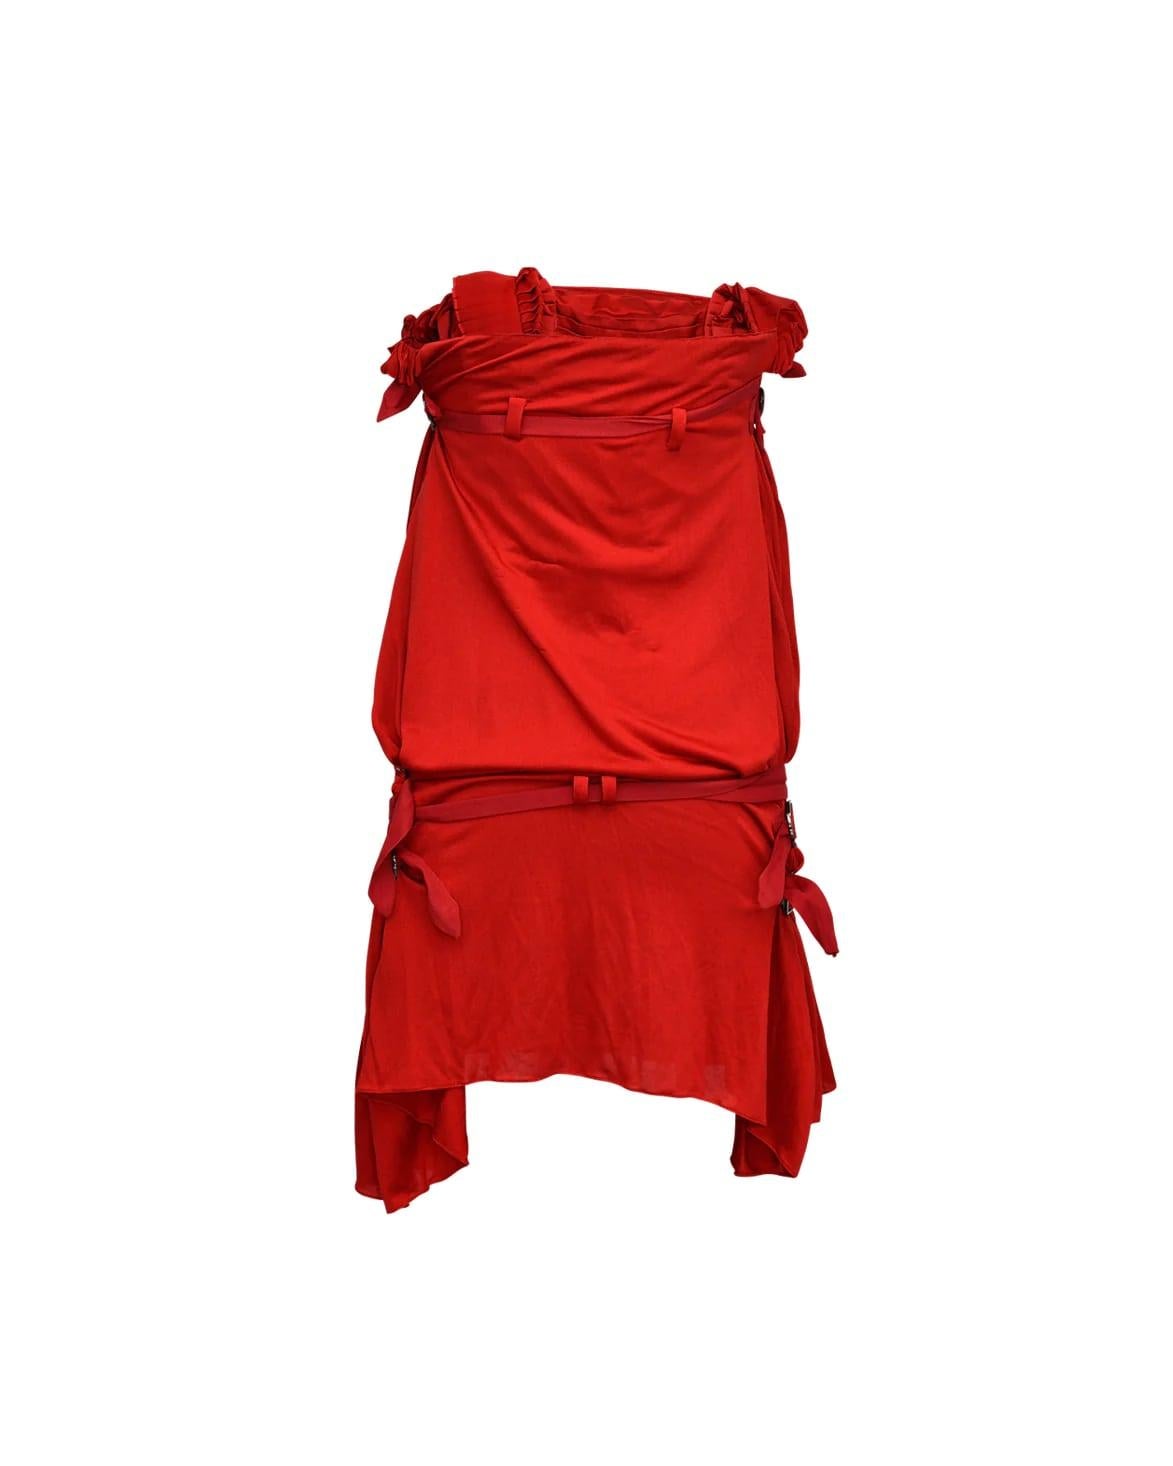 S/S 2003 Christian Dior Red Strapless Mini Dress by Galliano In Good Condition In North Hollywood, CA